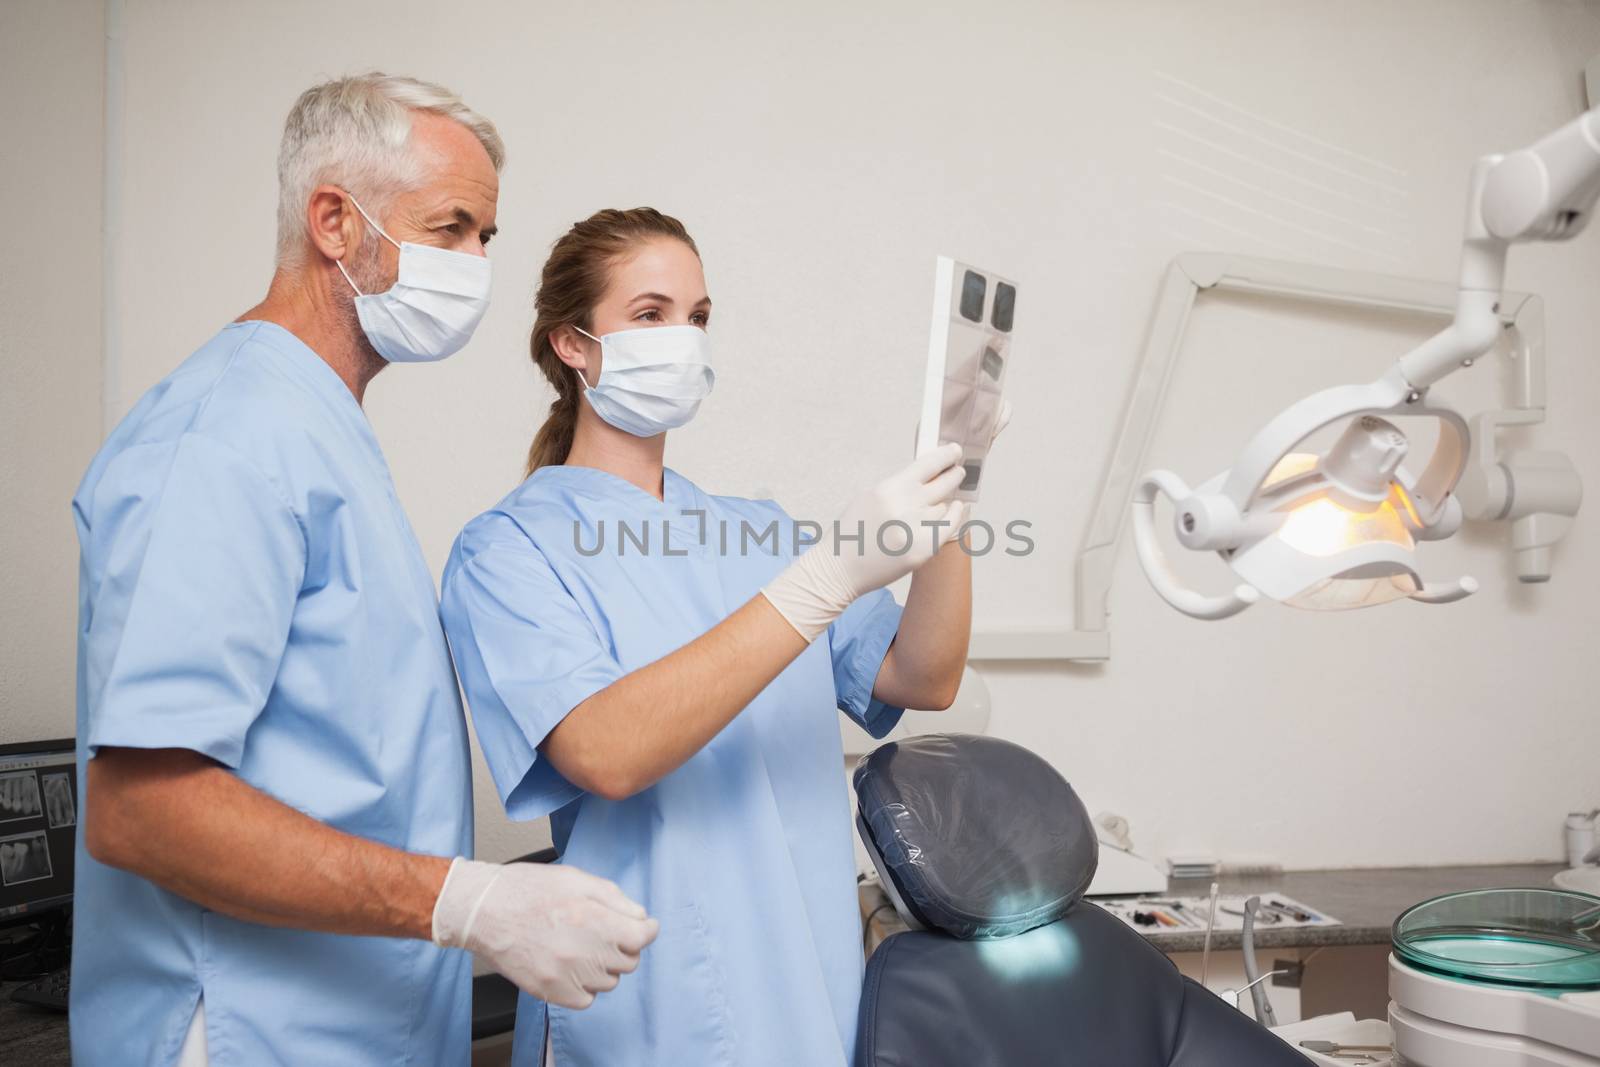 Dentist and assistant studying x-rays by Wavebreakmedia